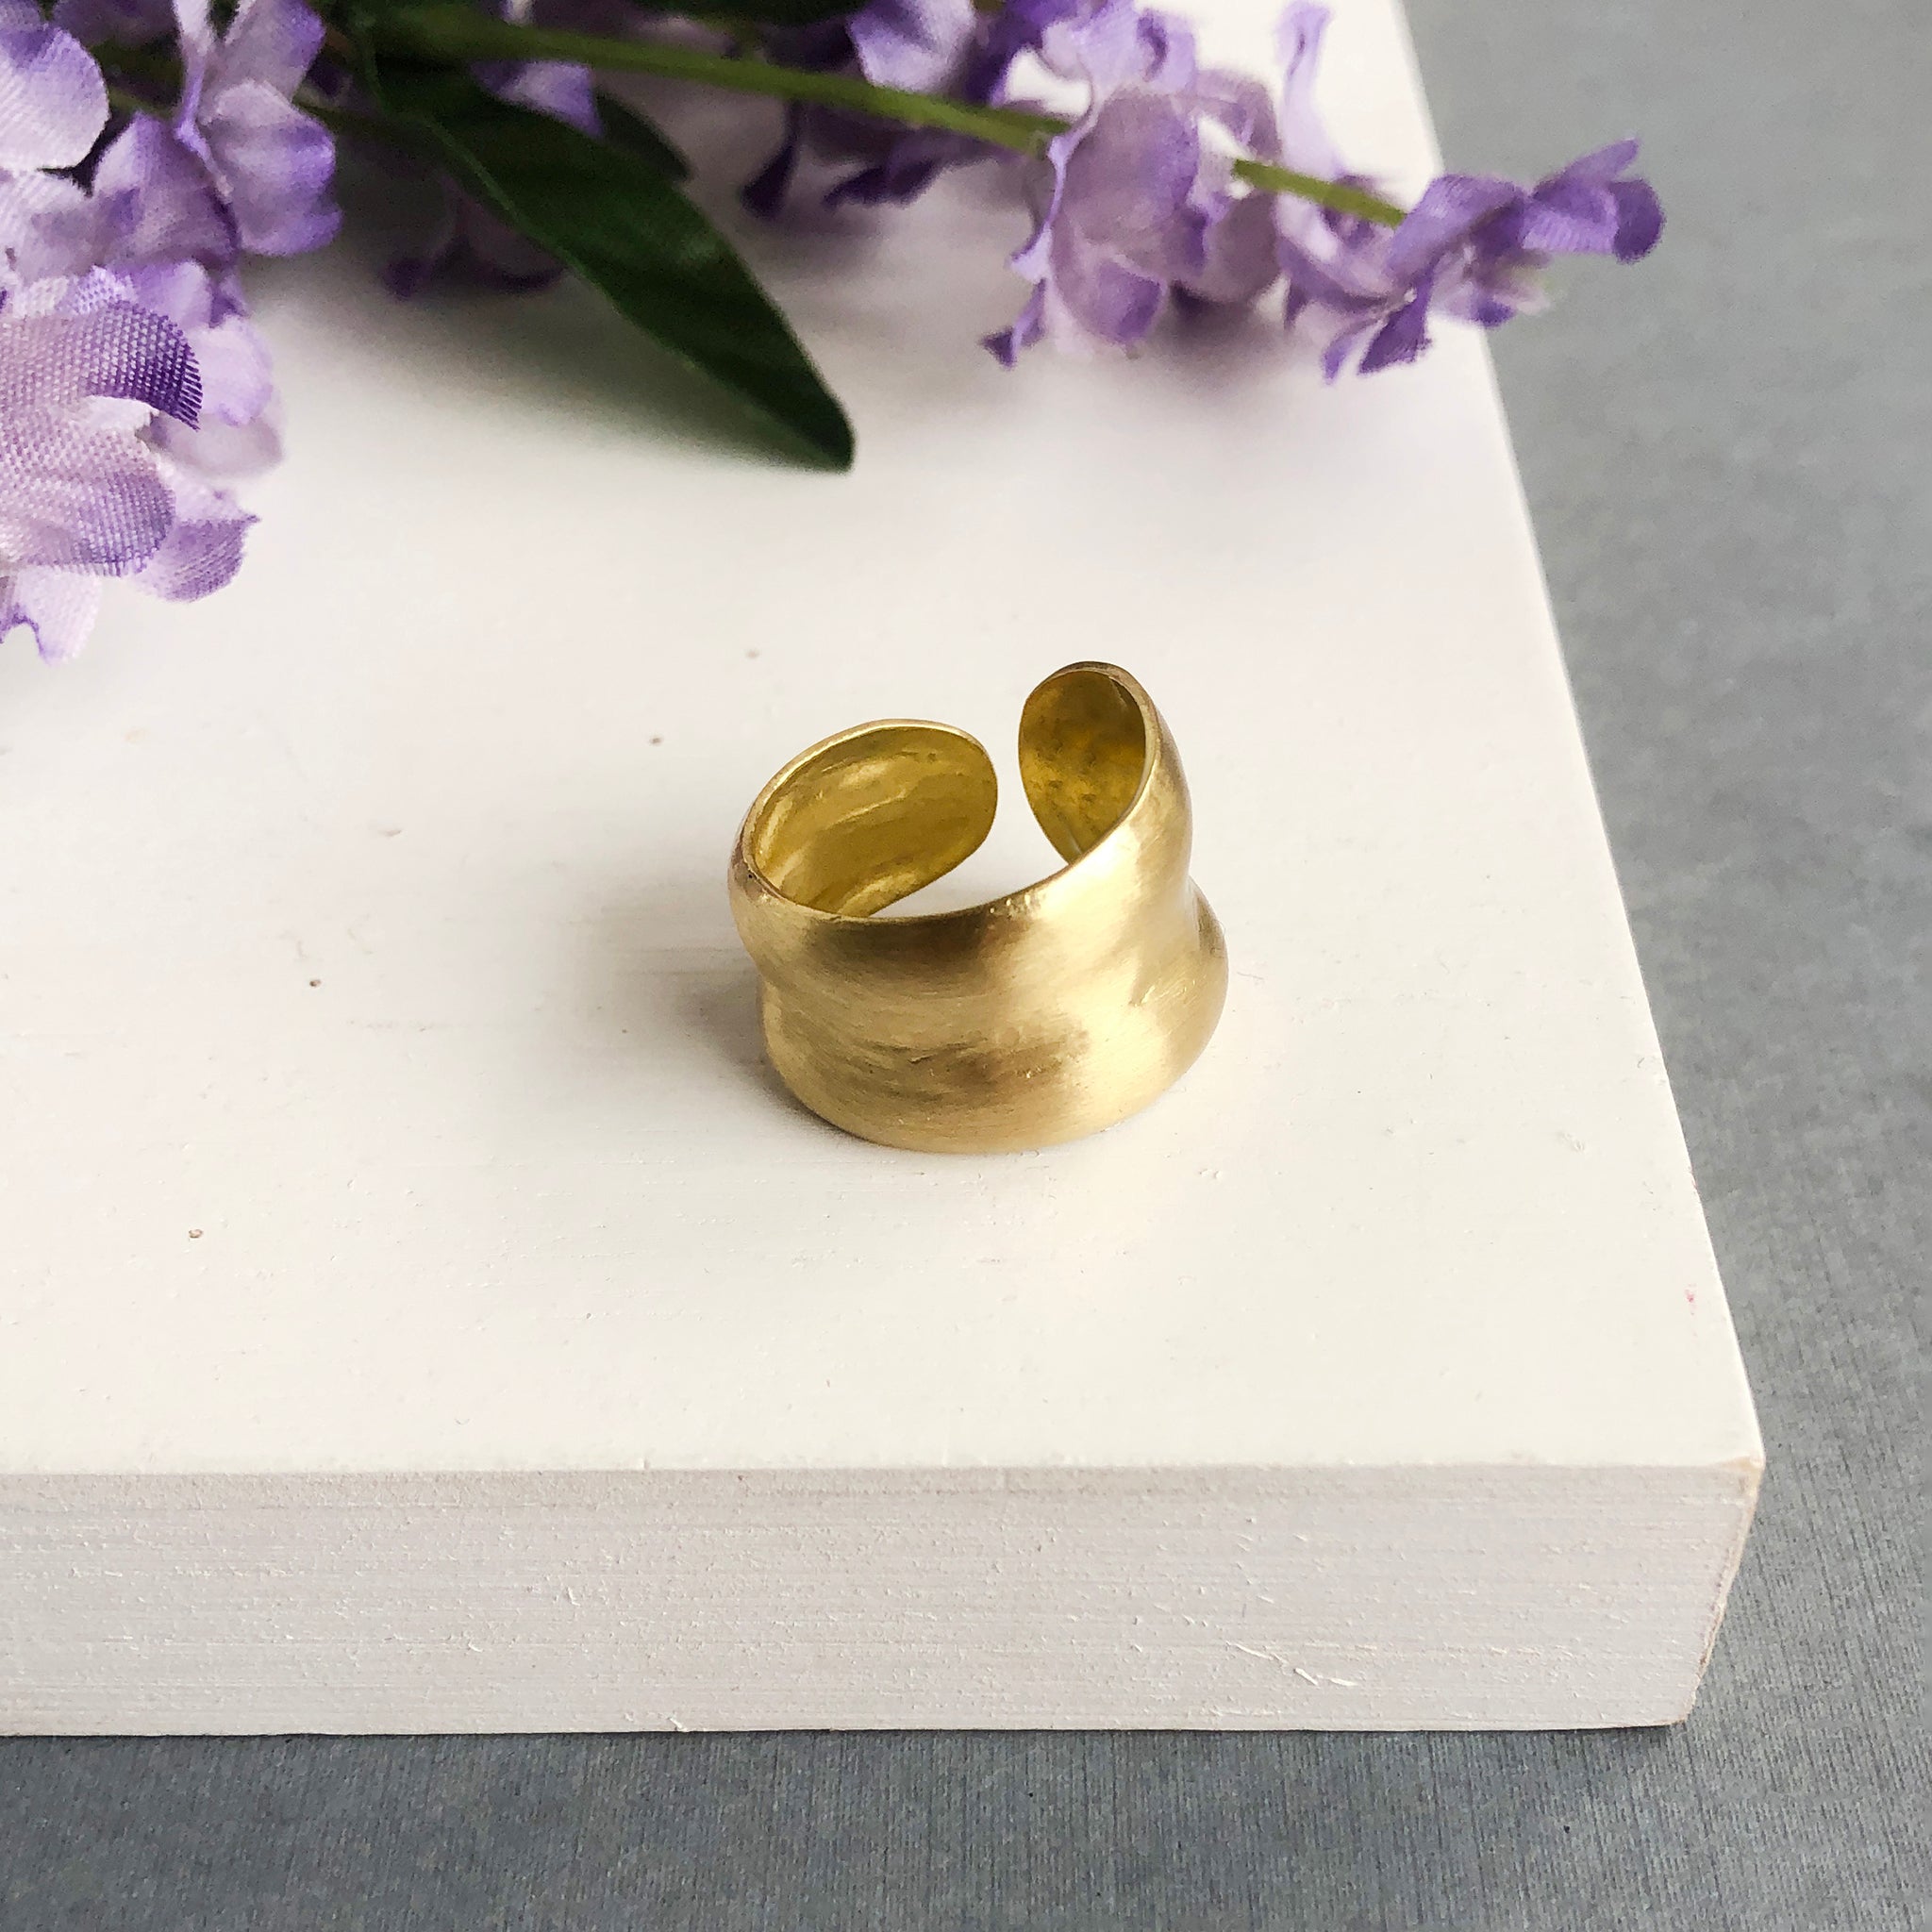 A single gold ring is shown. The sculptural technique gives it a smooth, rounded outer edge with a subtle indent in the center.